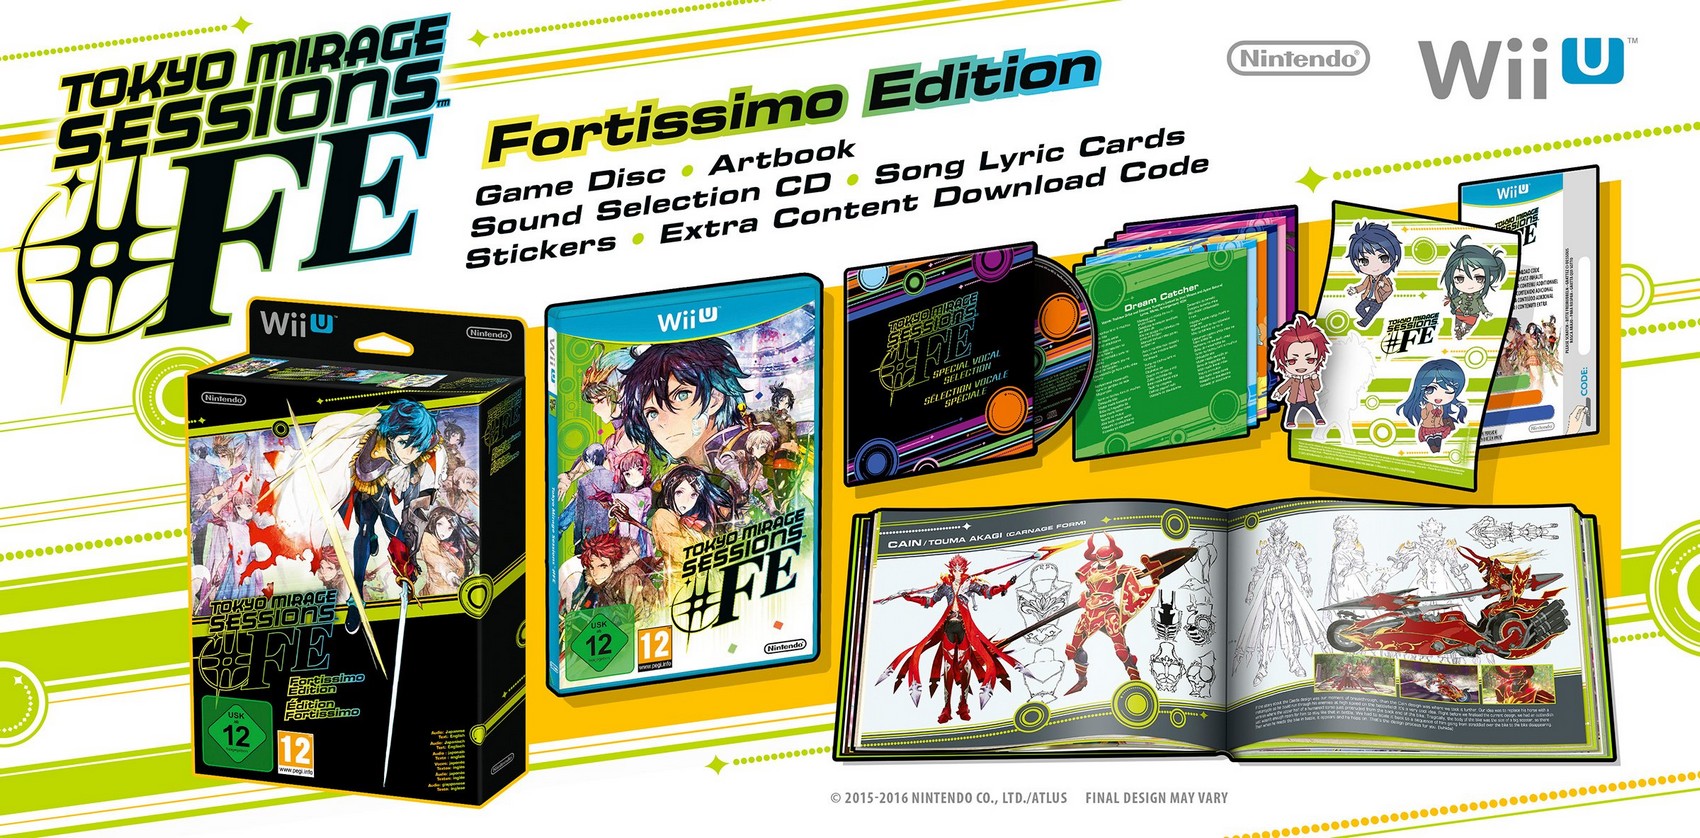 Tokyo-mirage-sesssions-fe edition limitée europe 2